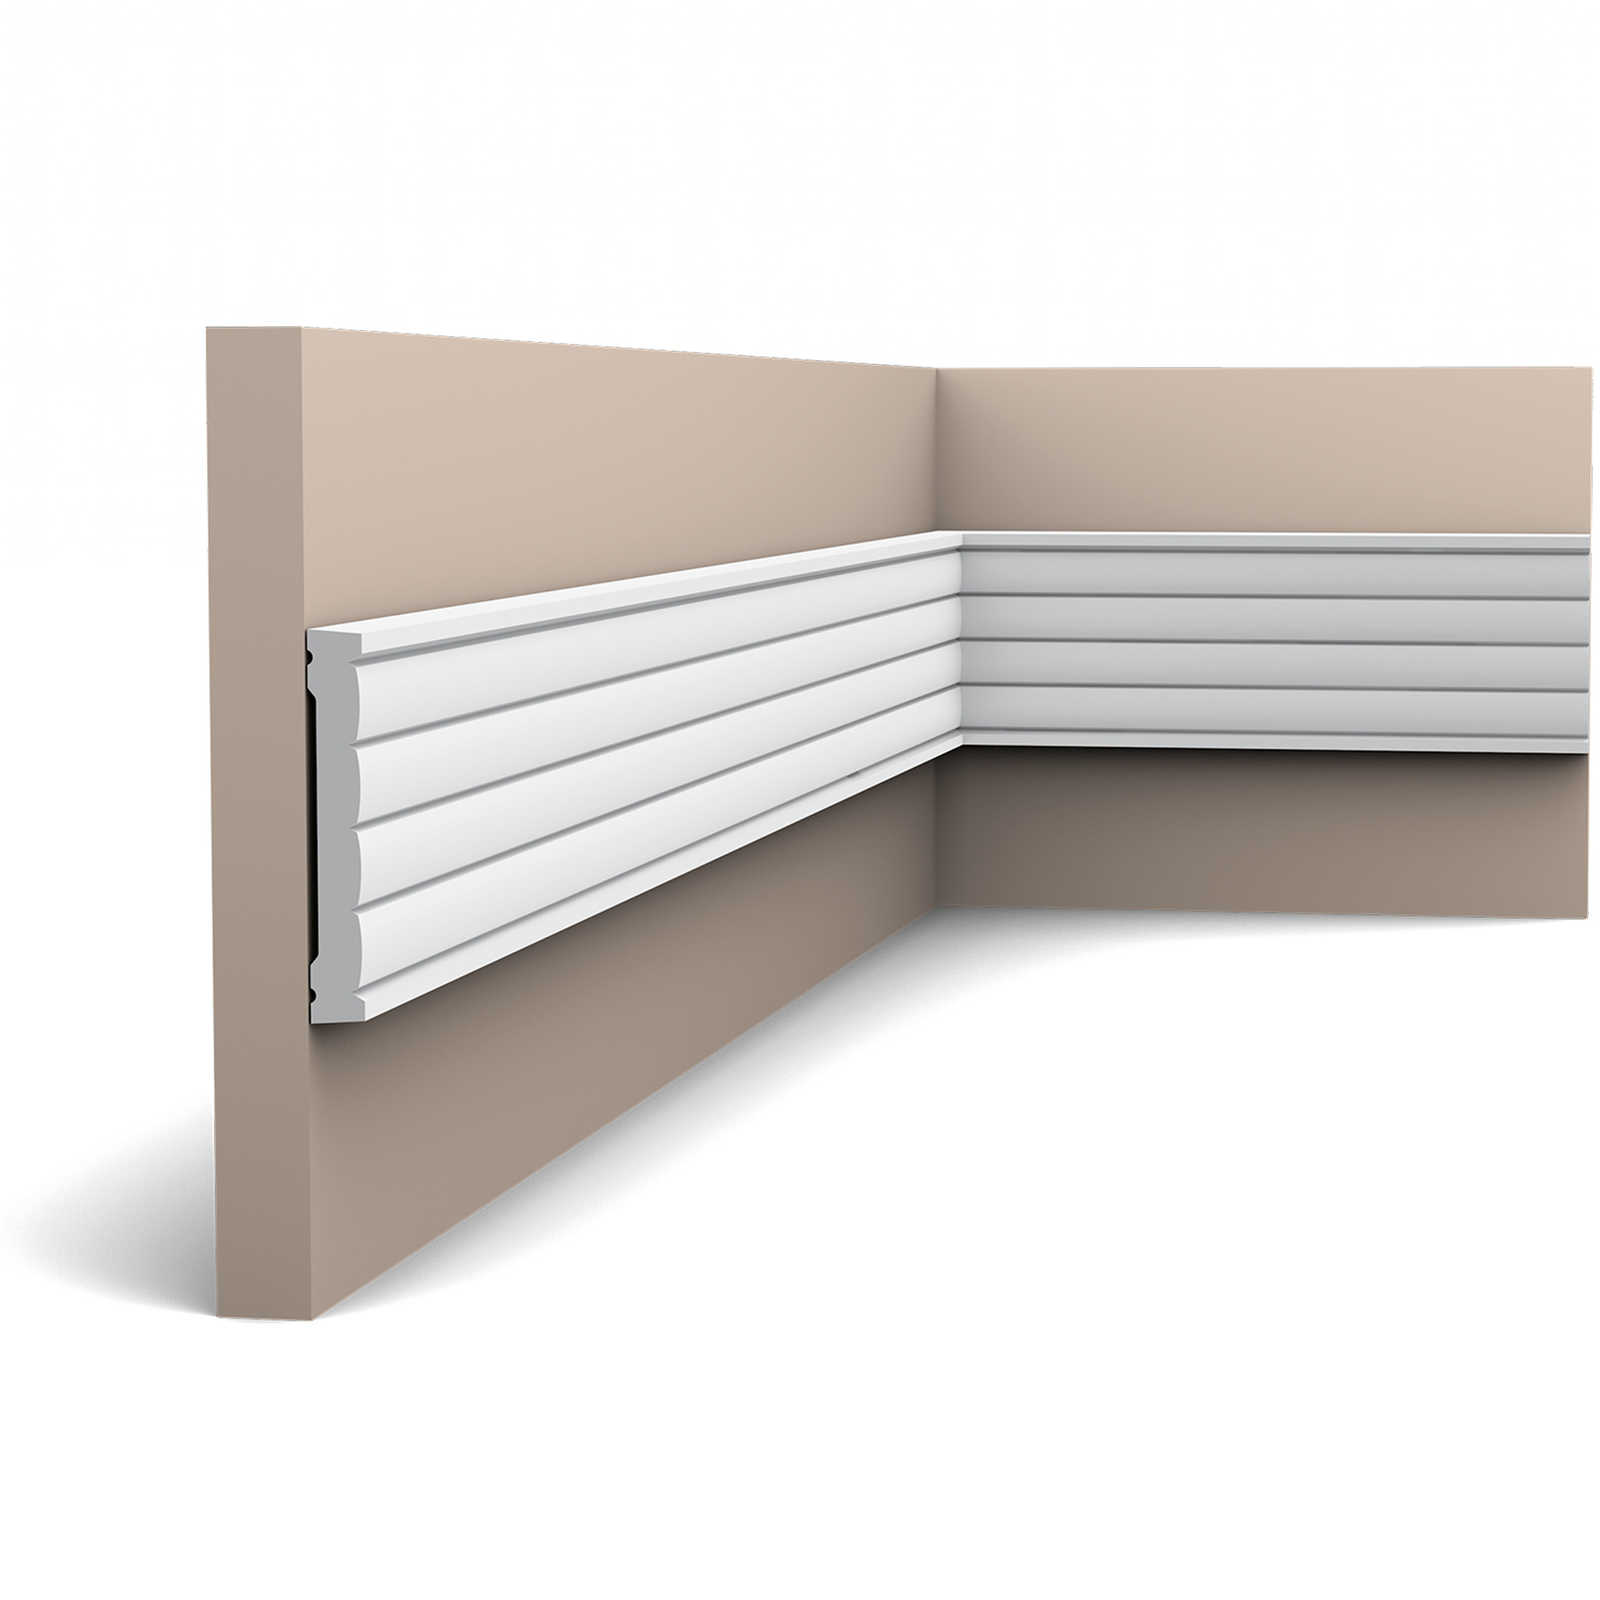 Classic Luxor wall moulding - P5020
